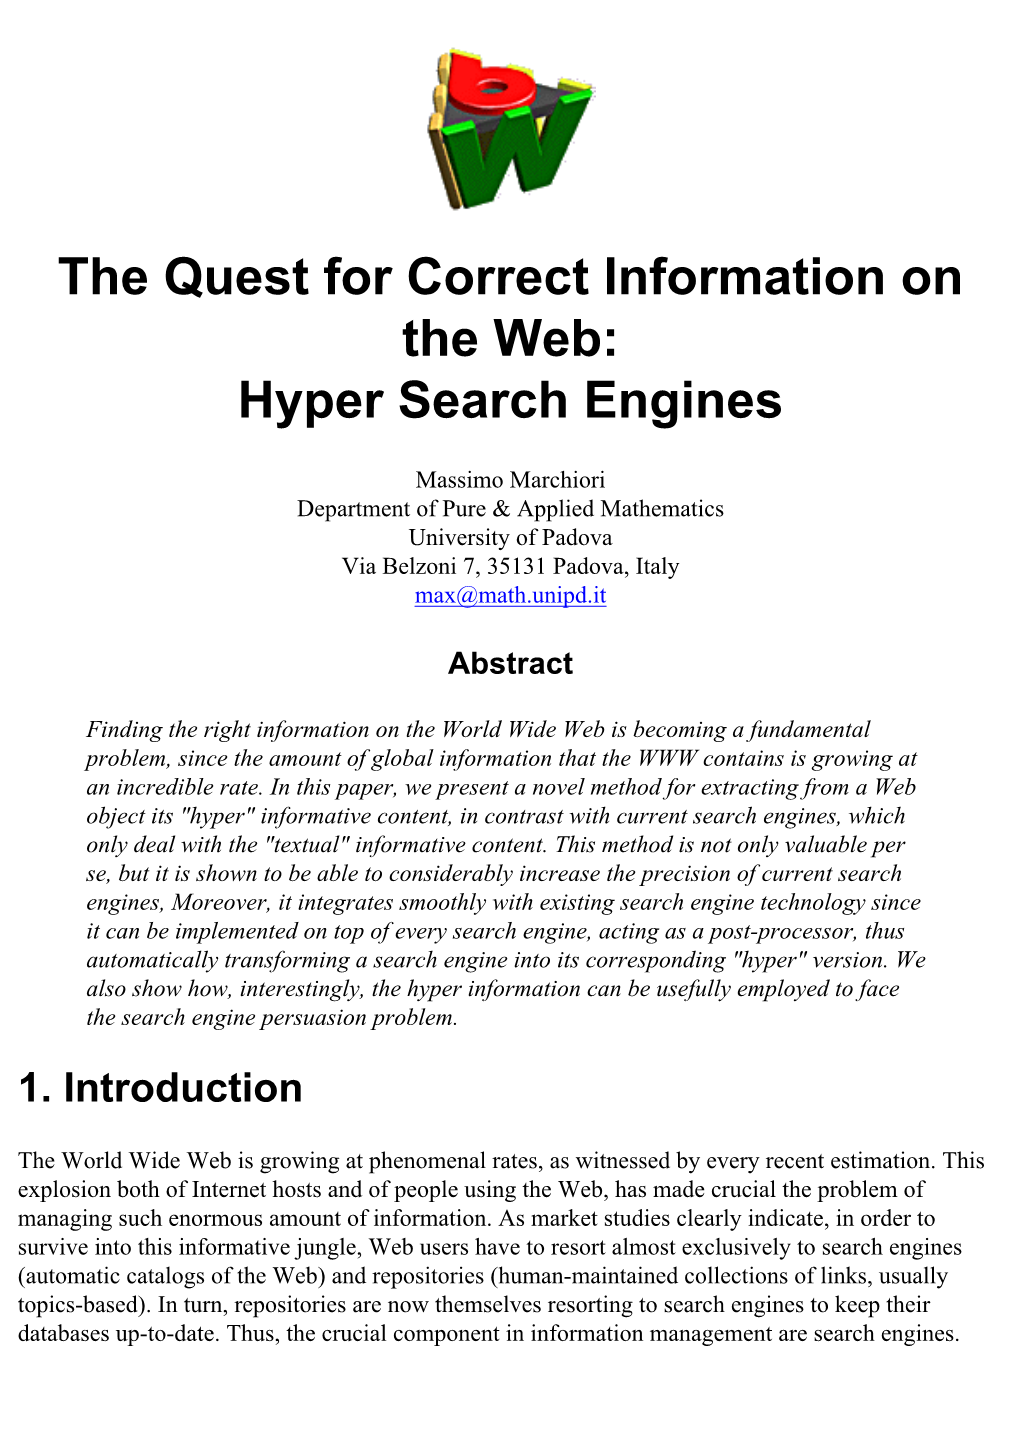 The Quest for Correct Information on the Web: Hyper Search Engines